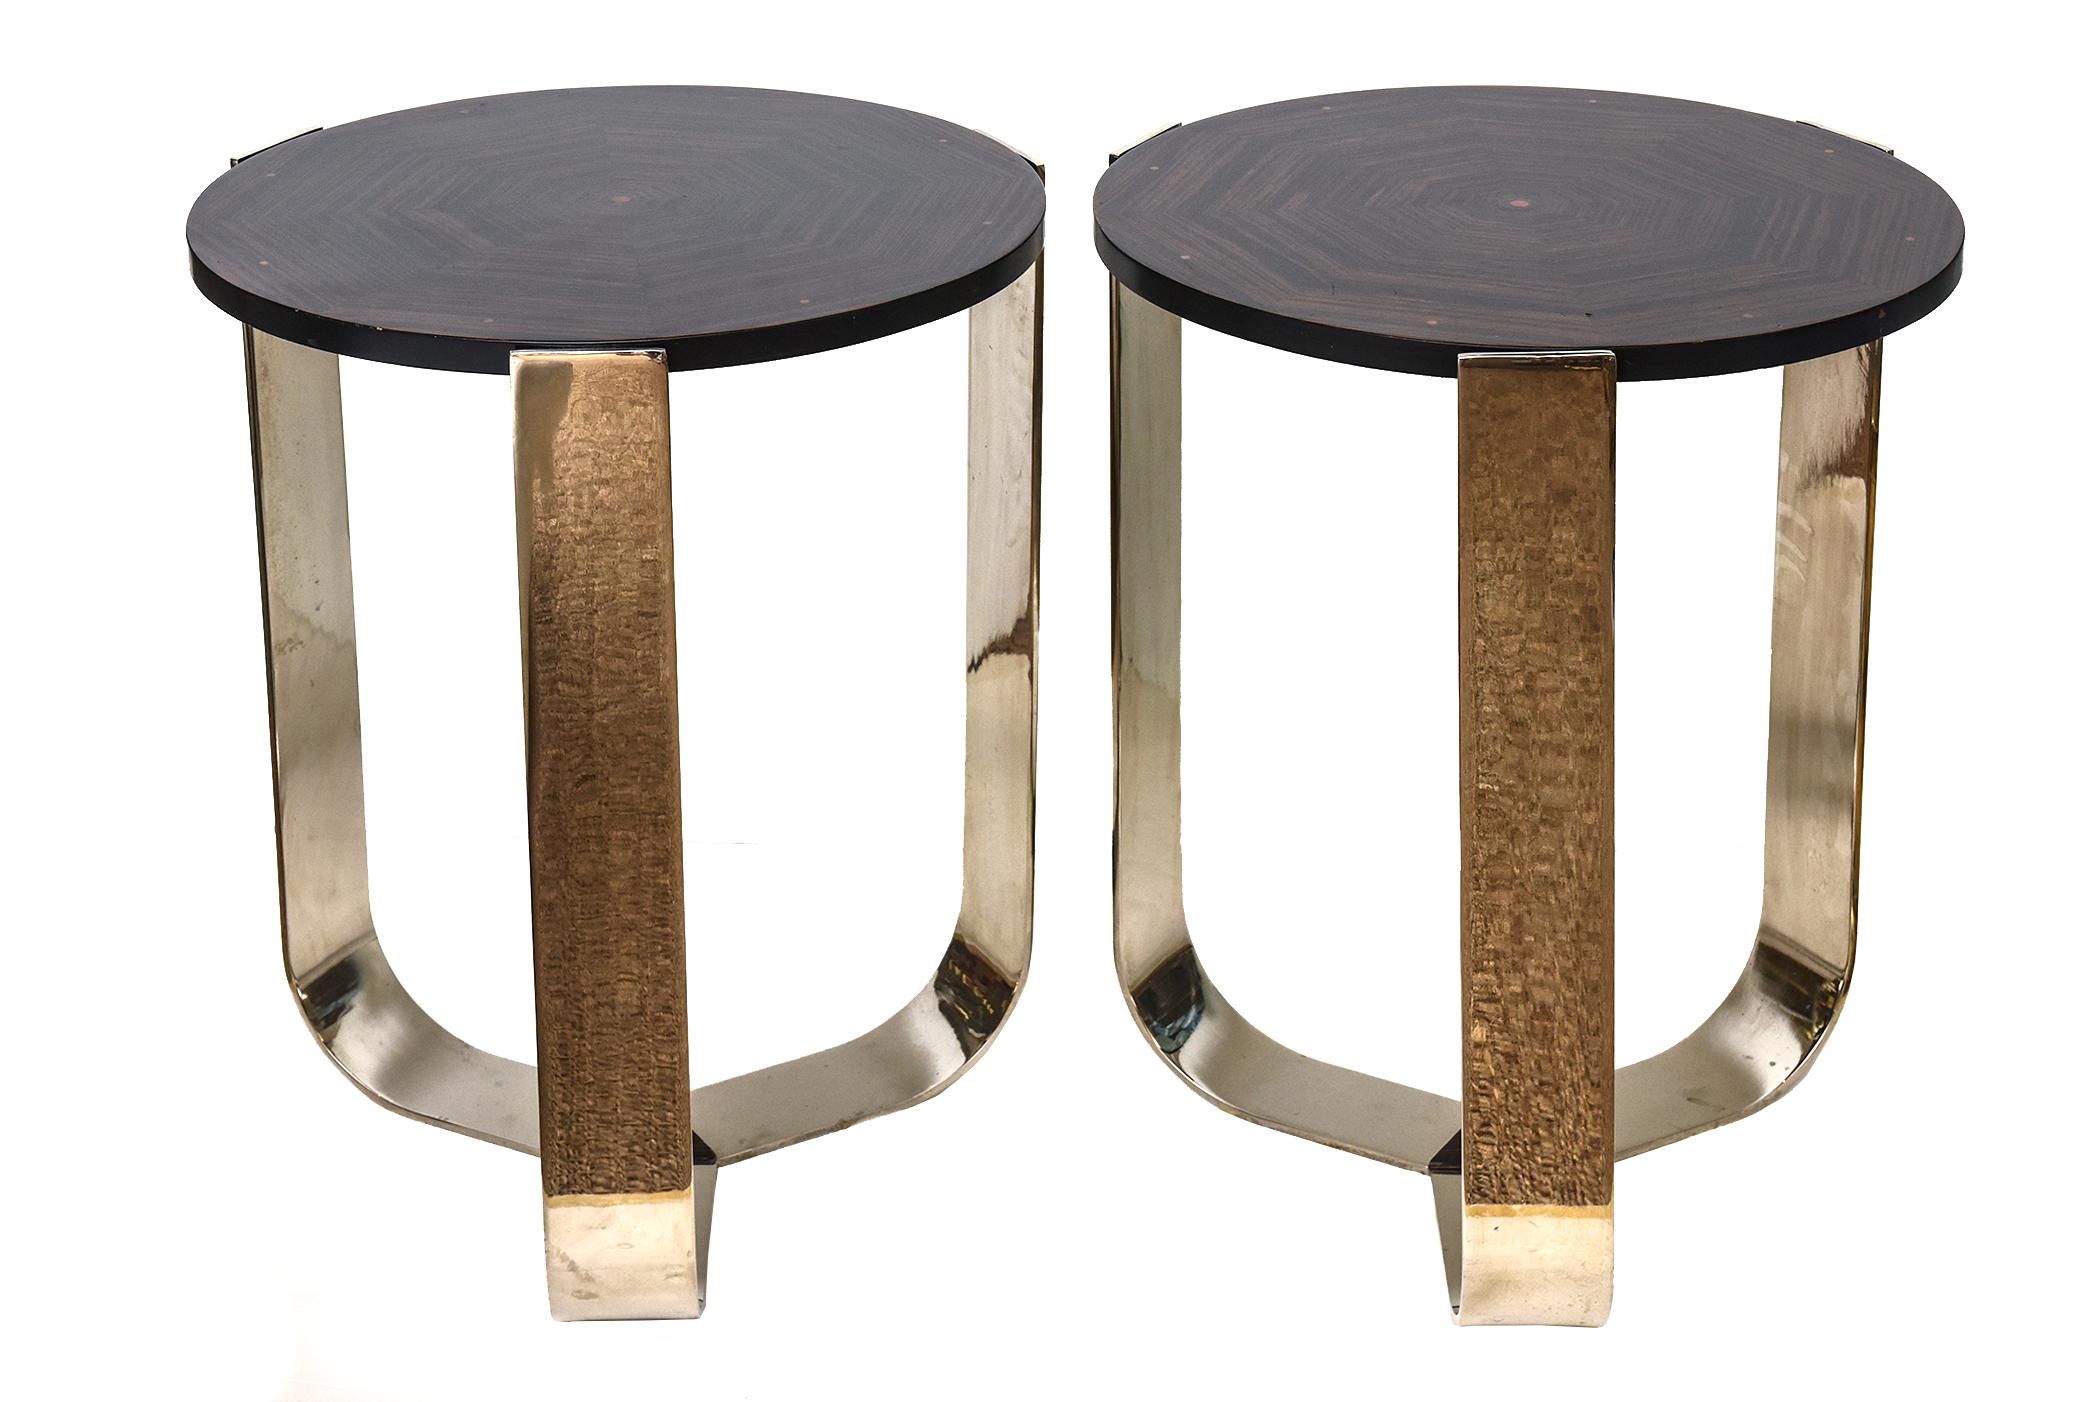 This pair of handsome art deco style and influenced side/ end tables are chrome plated stainless steel with a combination of rosewood high gloss polish tops. The web swirl design of the rosewood has inlaid other wood of a copper like color of